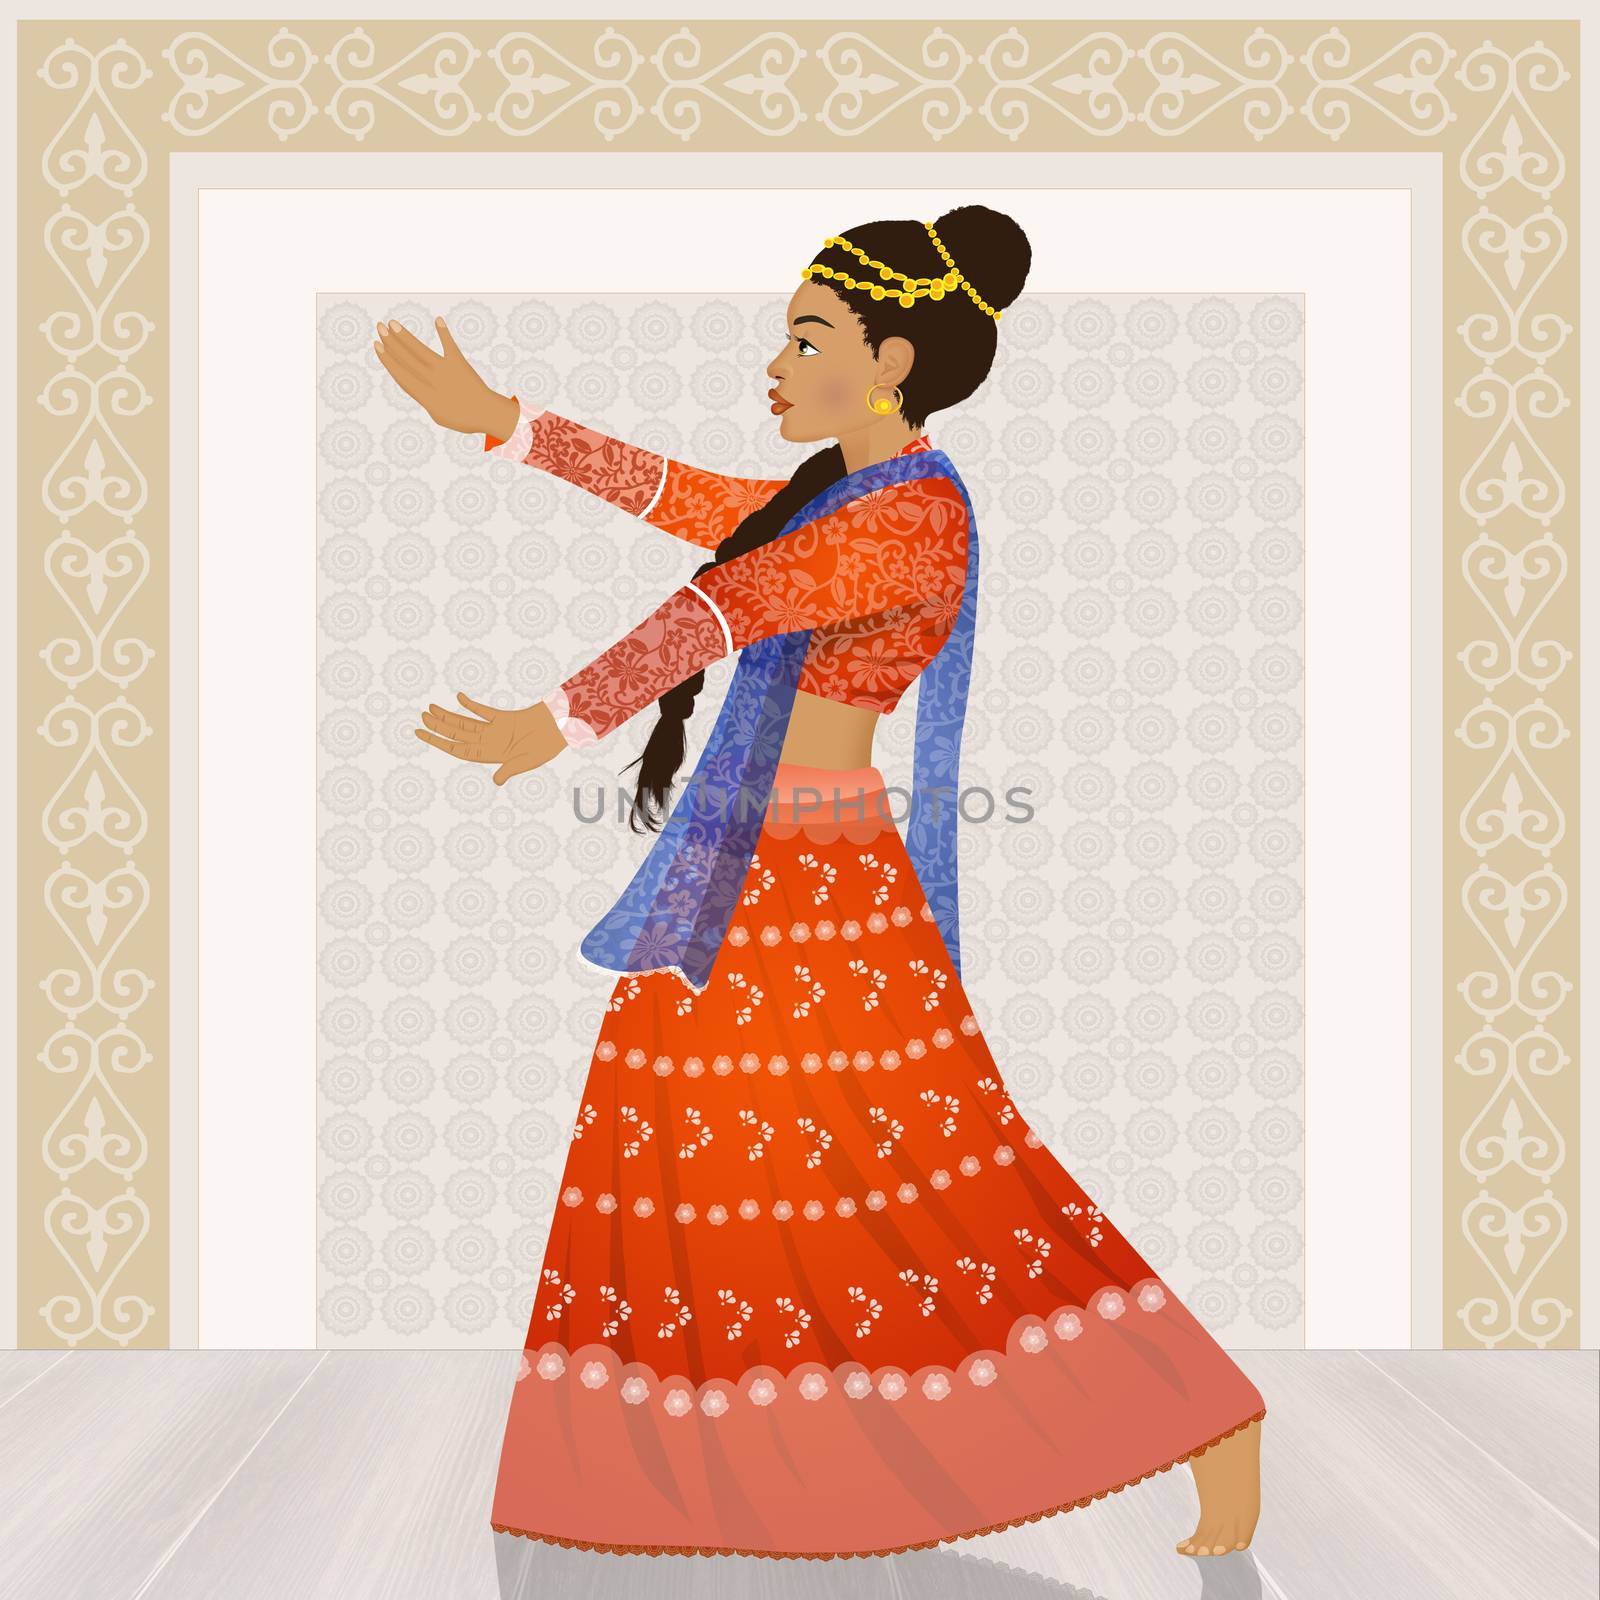 traditional Indian dance by adrenalina